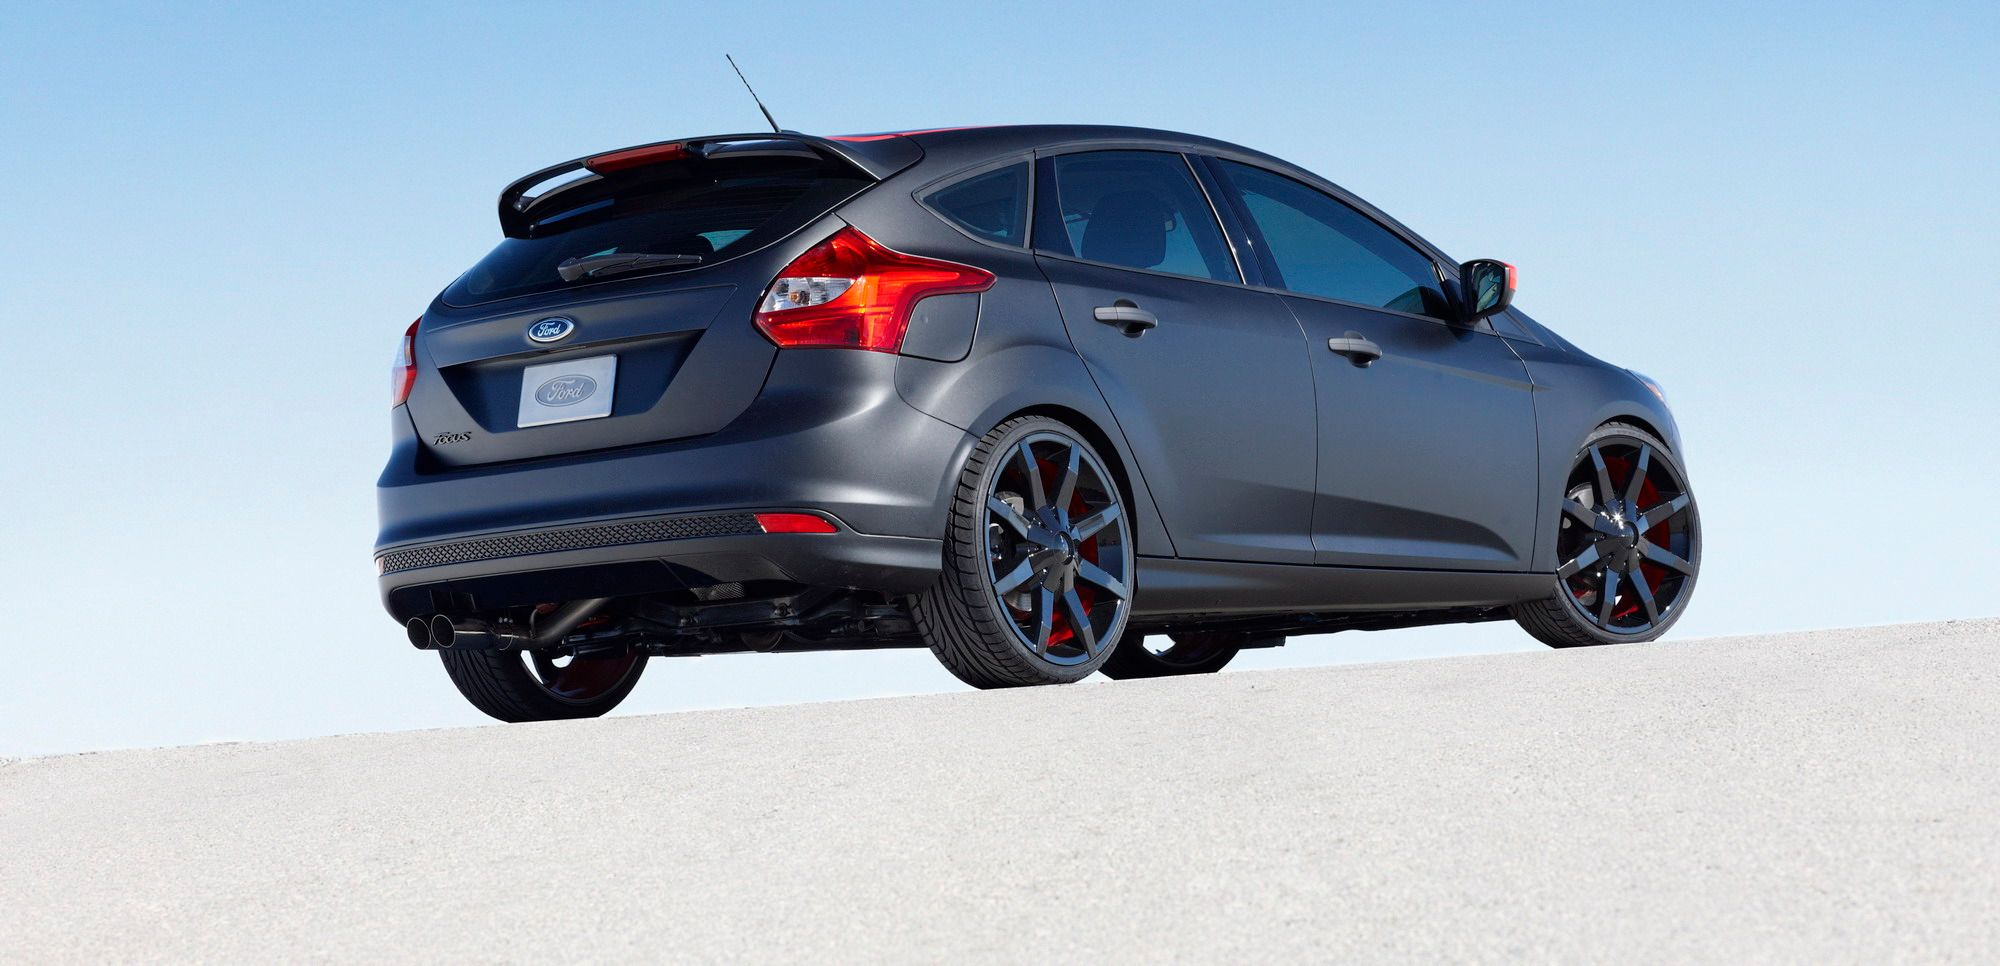 2012 Ford Focus by 3dCarbon